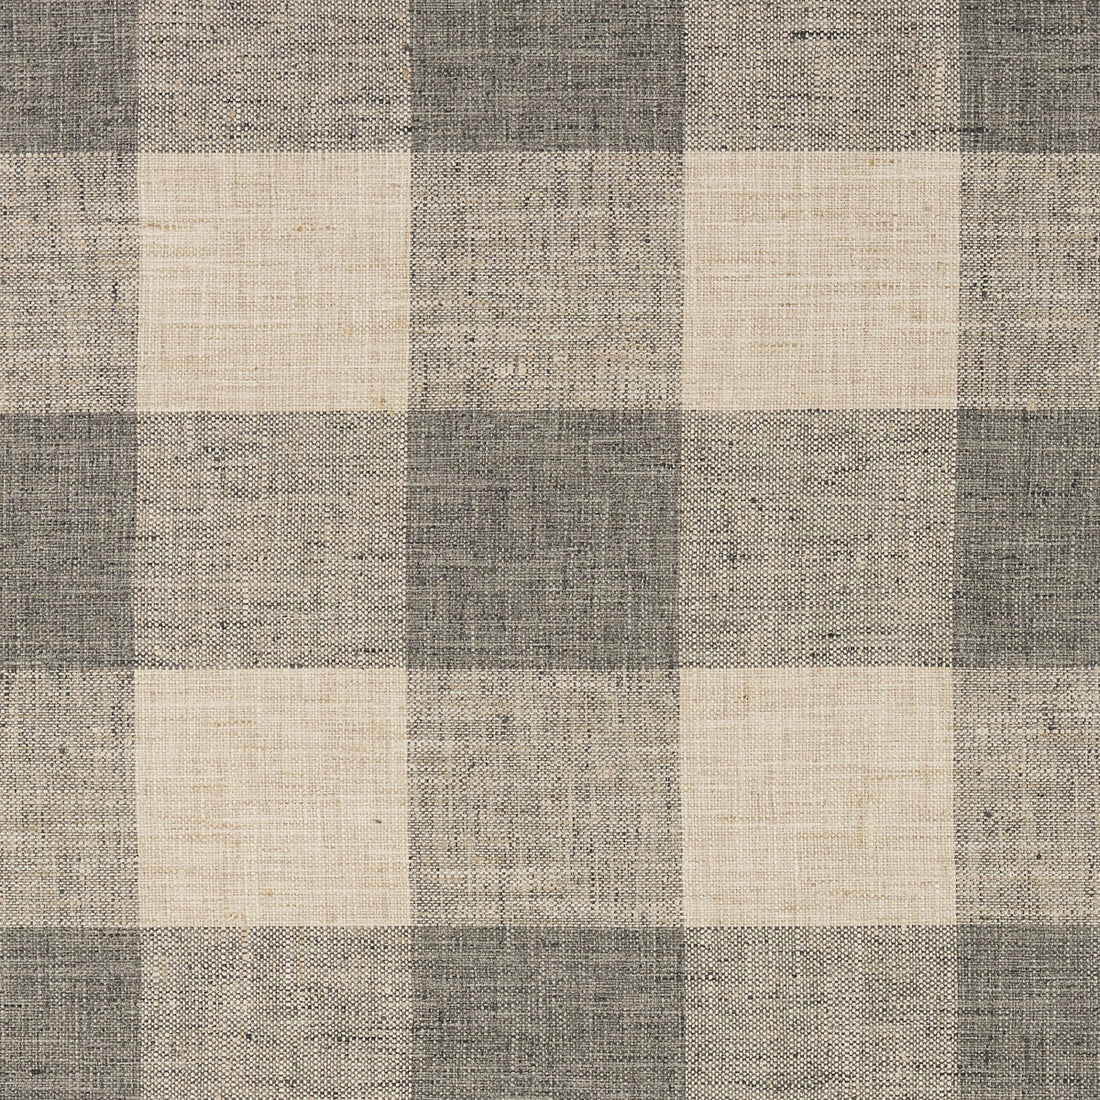 Kravet Basics fabric in 34090-11 color - pattern 34090.11.0 - by Kravet Basics in the Bungalow Chic II collection